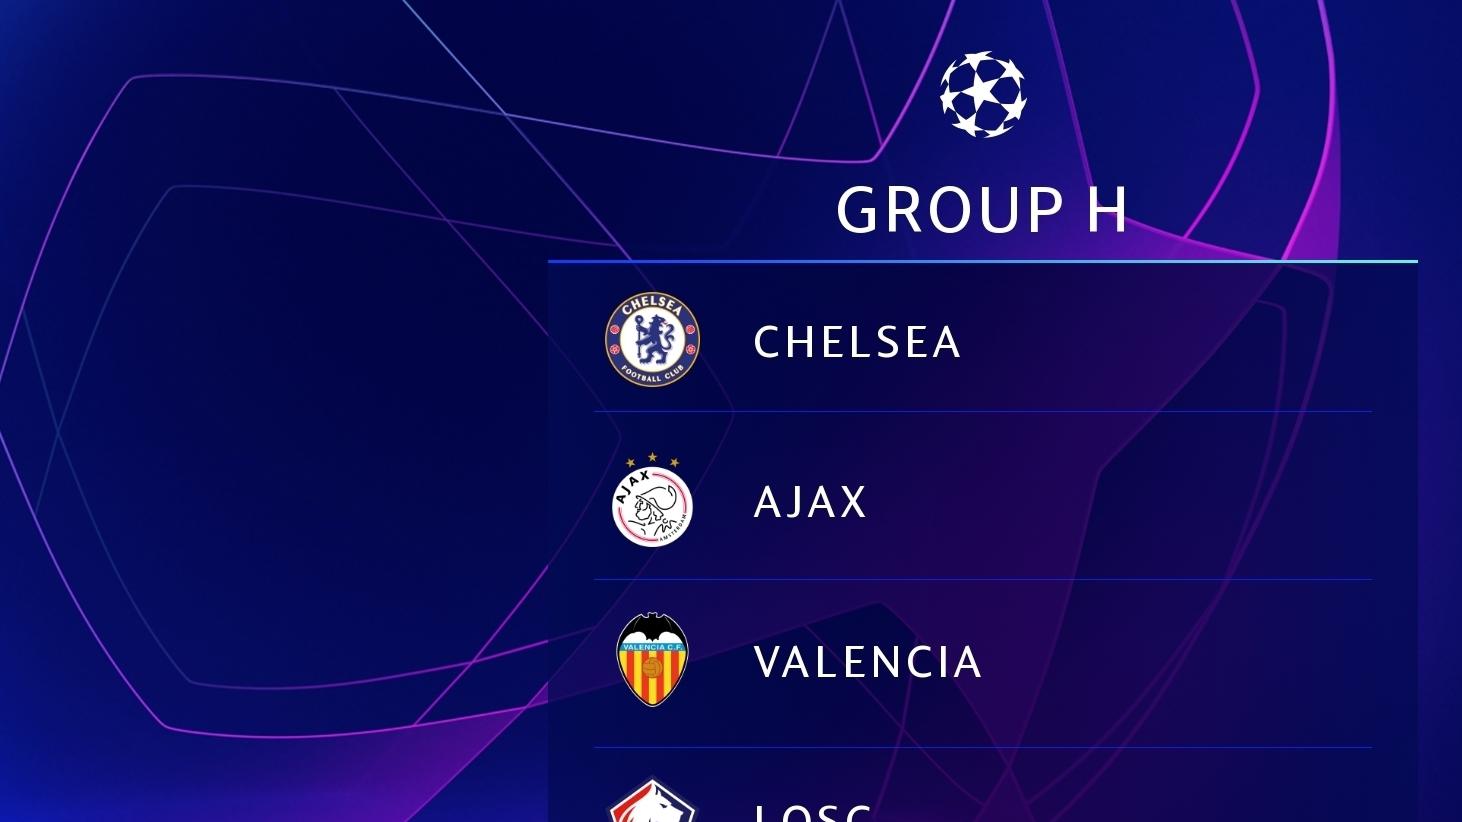 champions league group h results